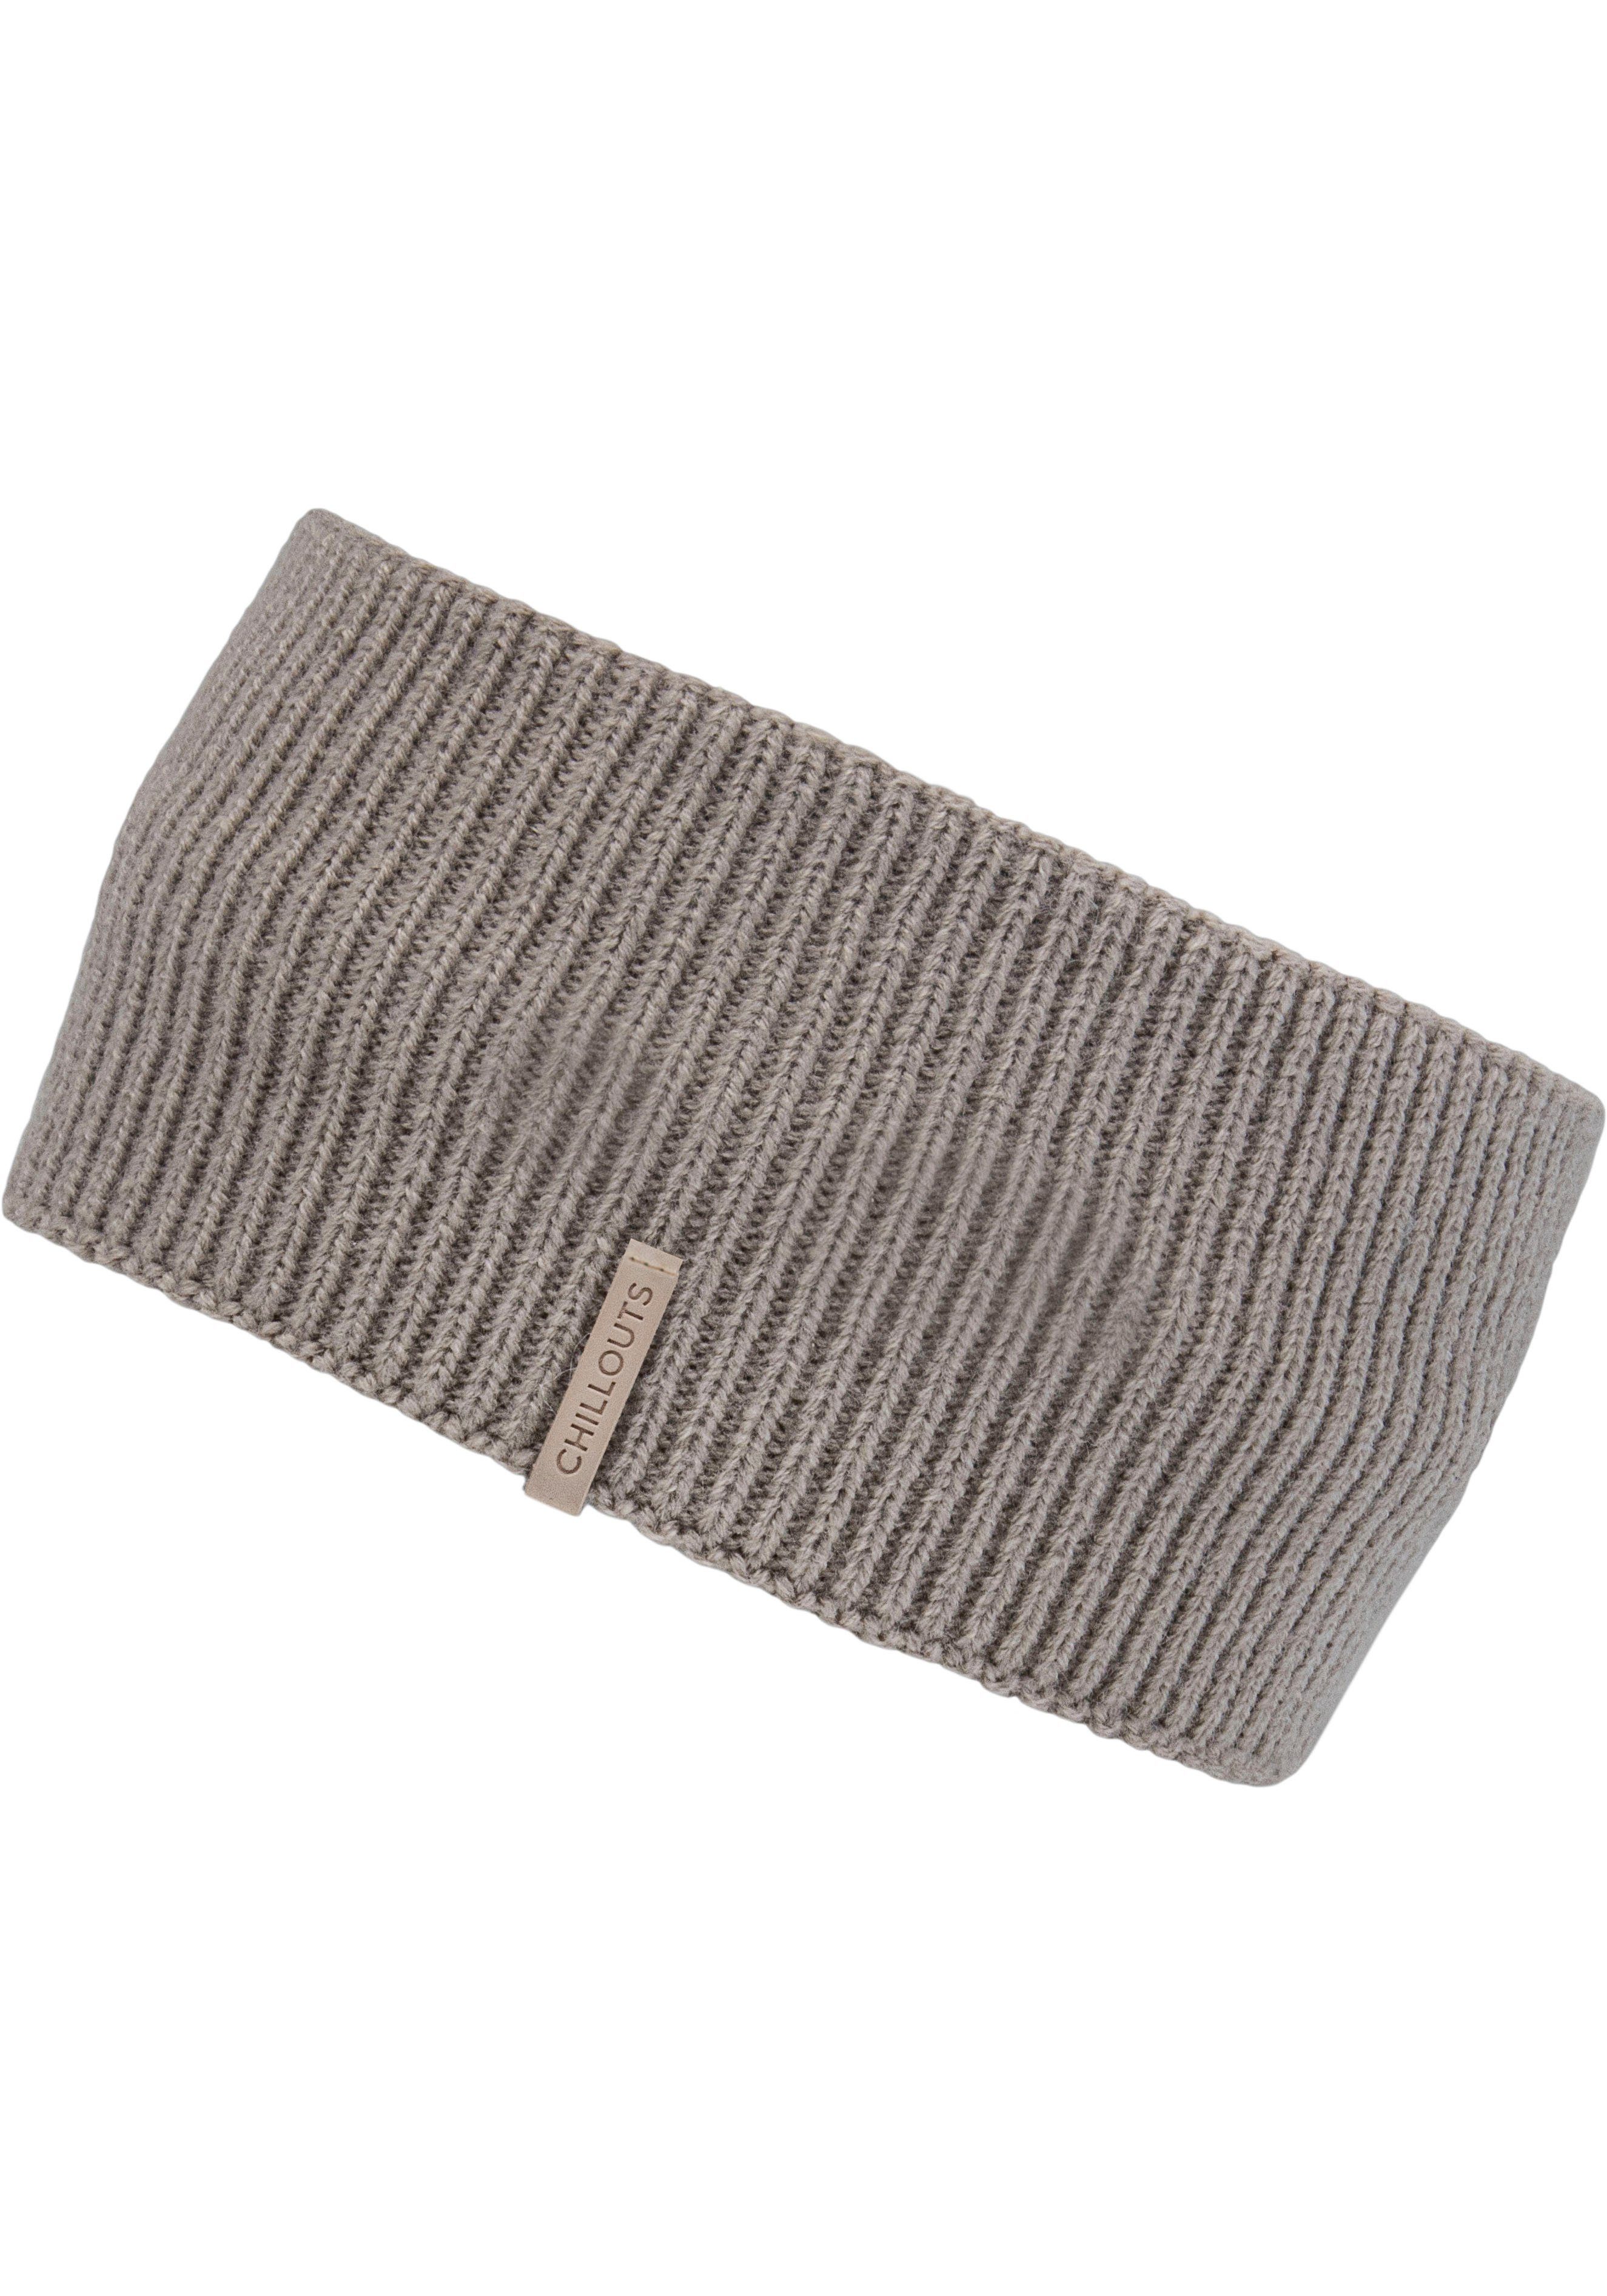 chillouts Stirnband taupe Ida Trendiges Accessoire Headband